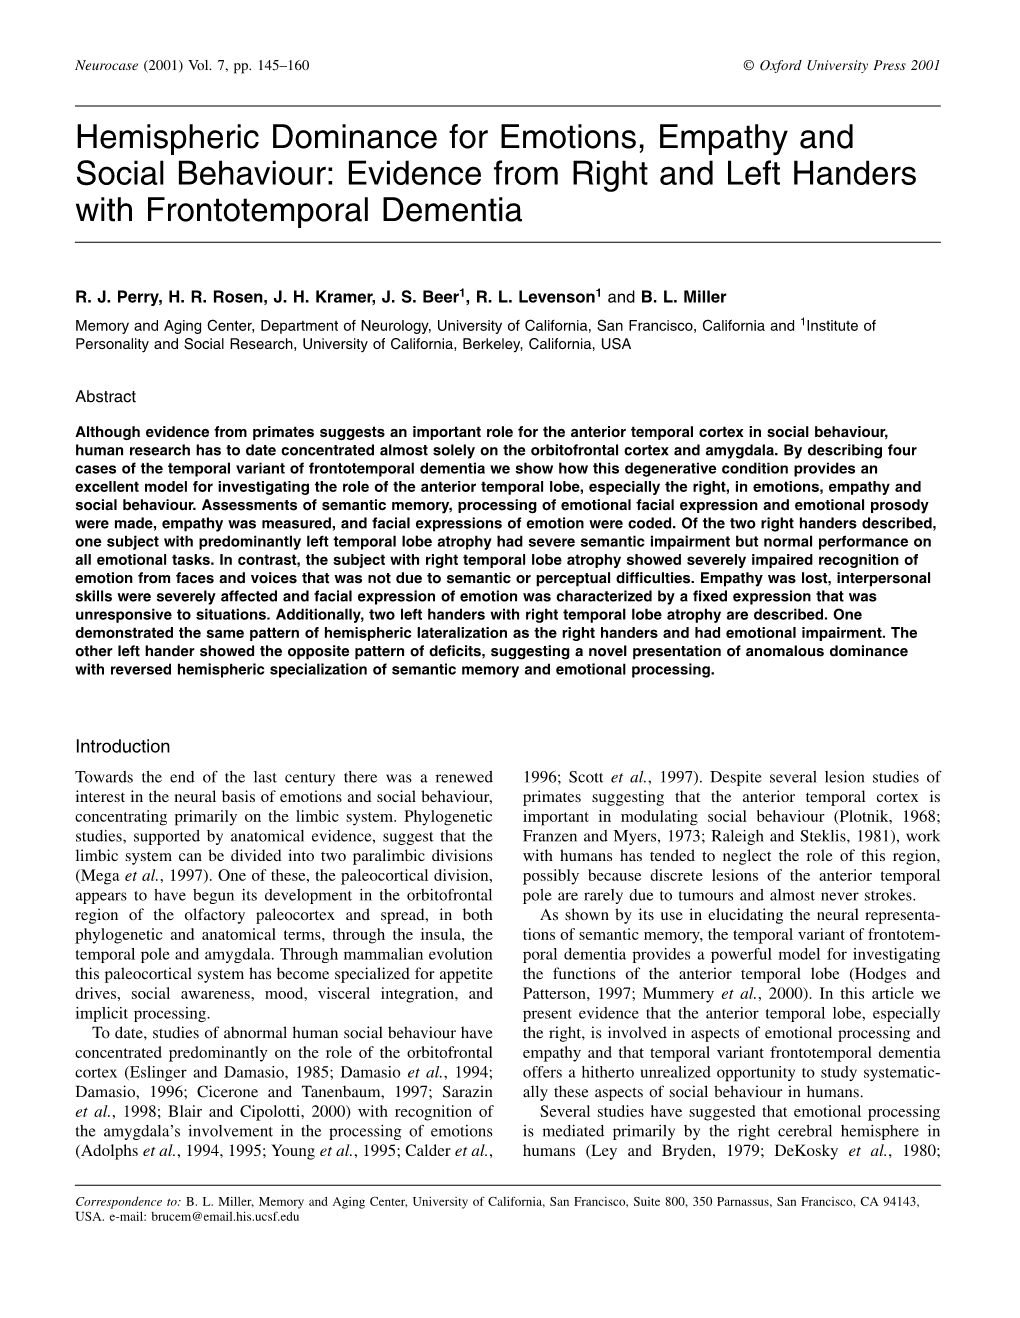 Hemispheric Dominance for Emotions, Empathy and Social Behaviour: Evidence from Right and Left Handers with Frontotemporal Dementia